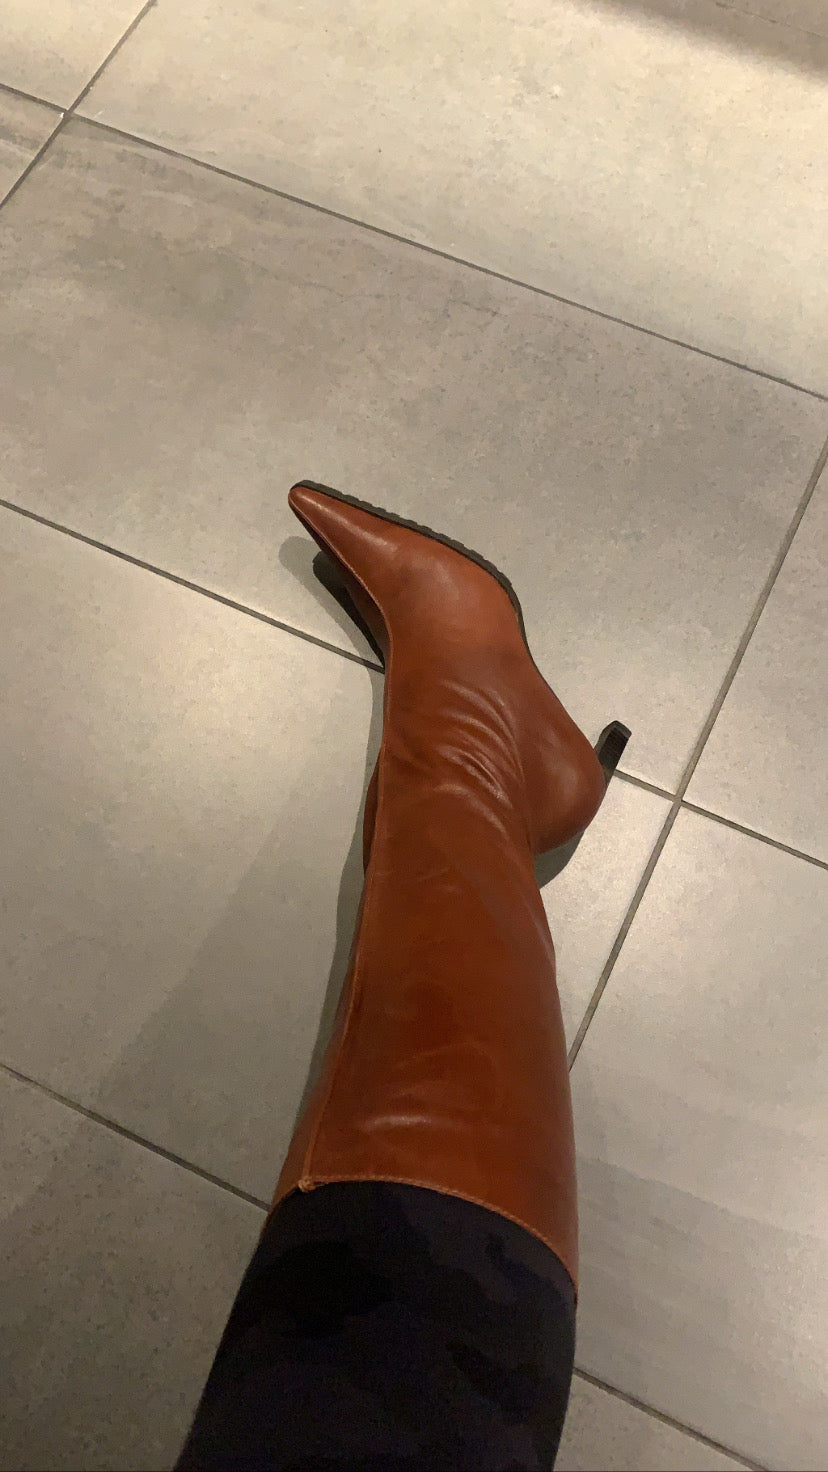 Brown Leather Pointy Toe Boots